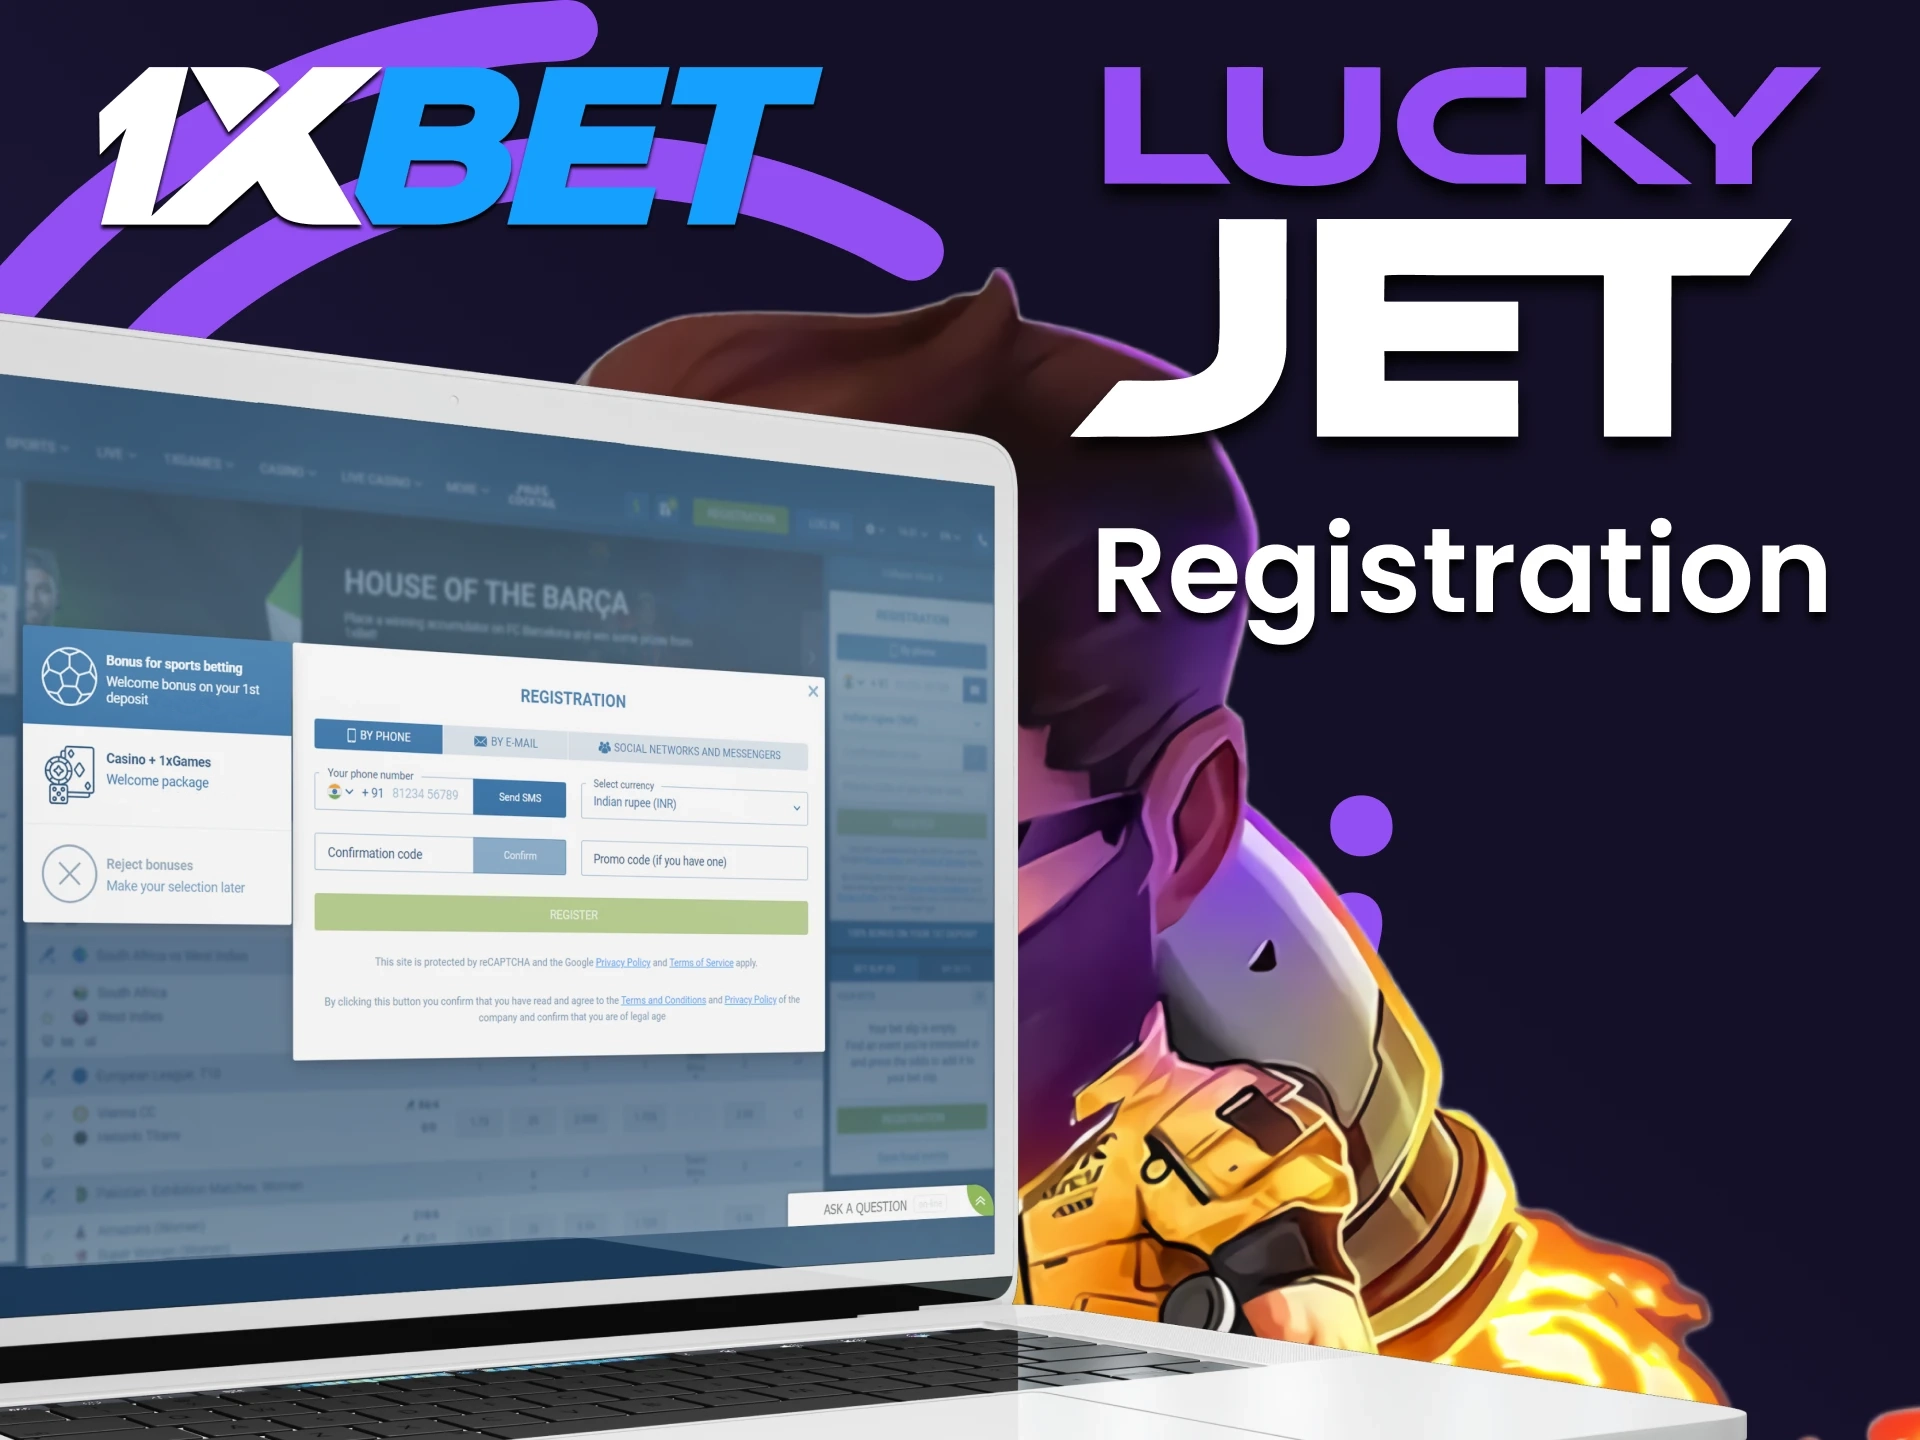 By going through the registration process on 1xbet you will be able to play Lucky Jet.